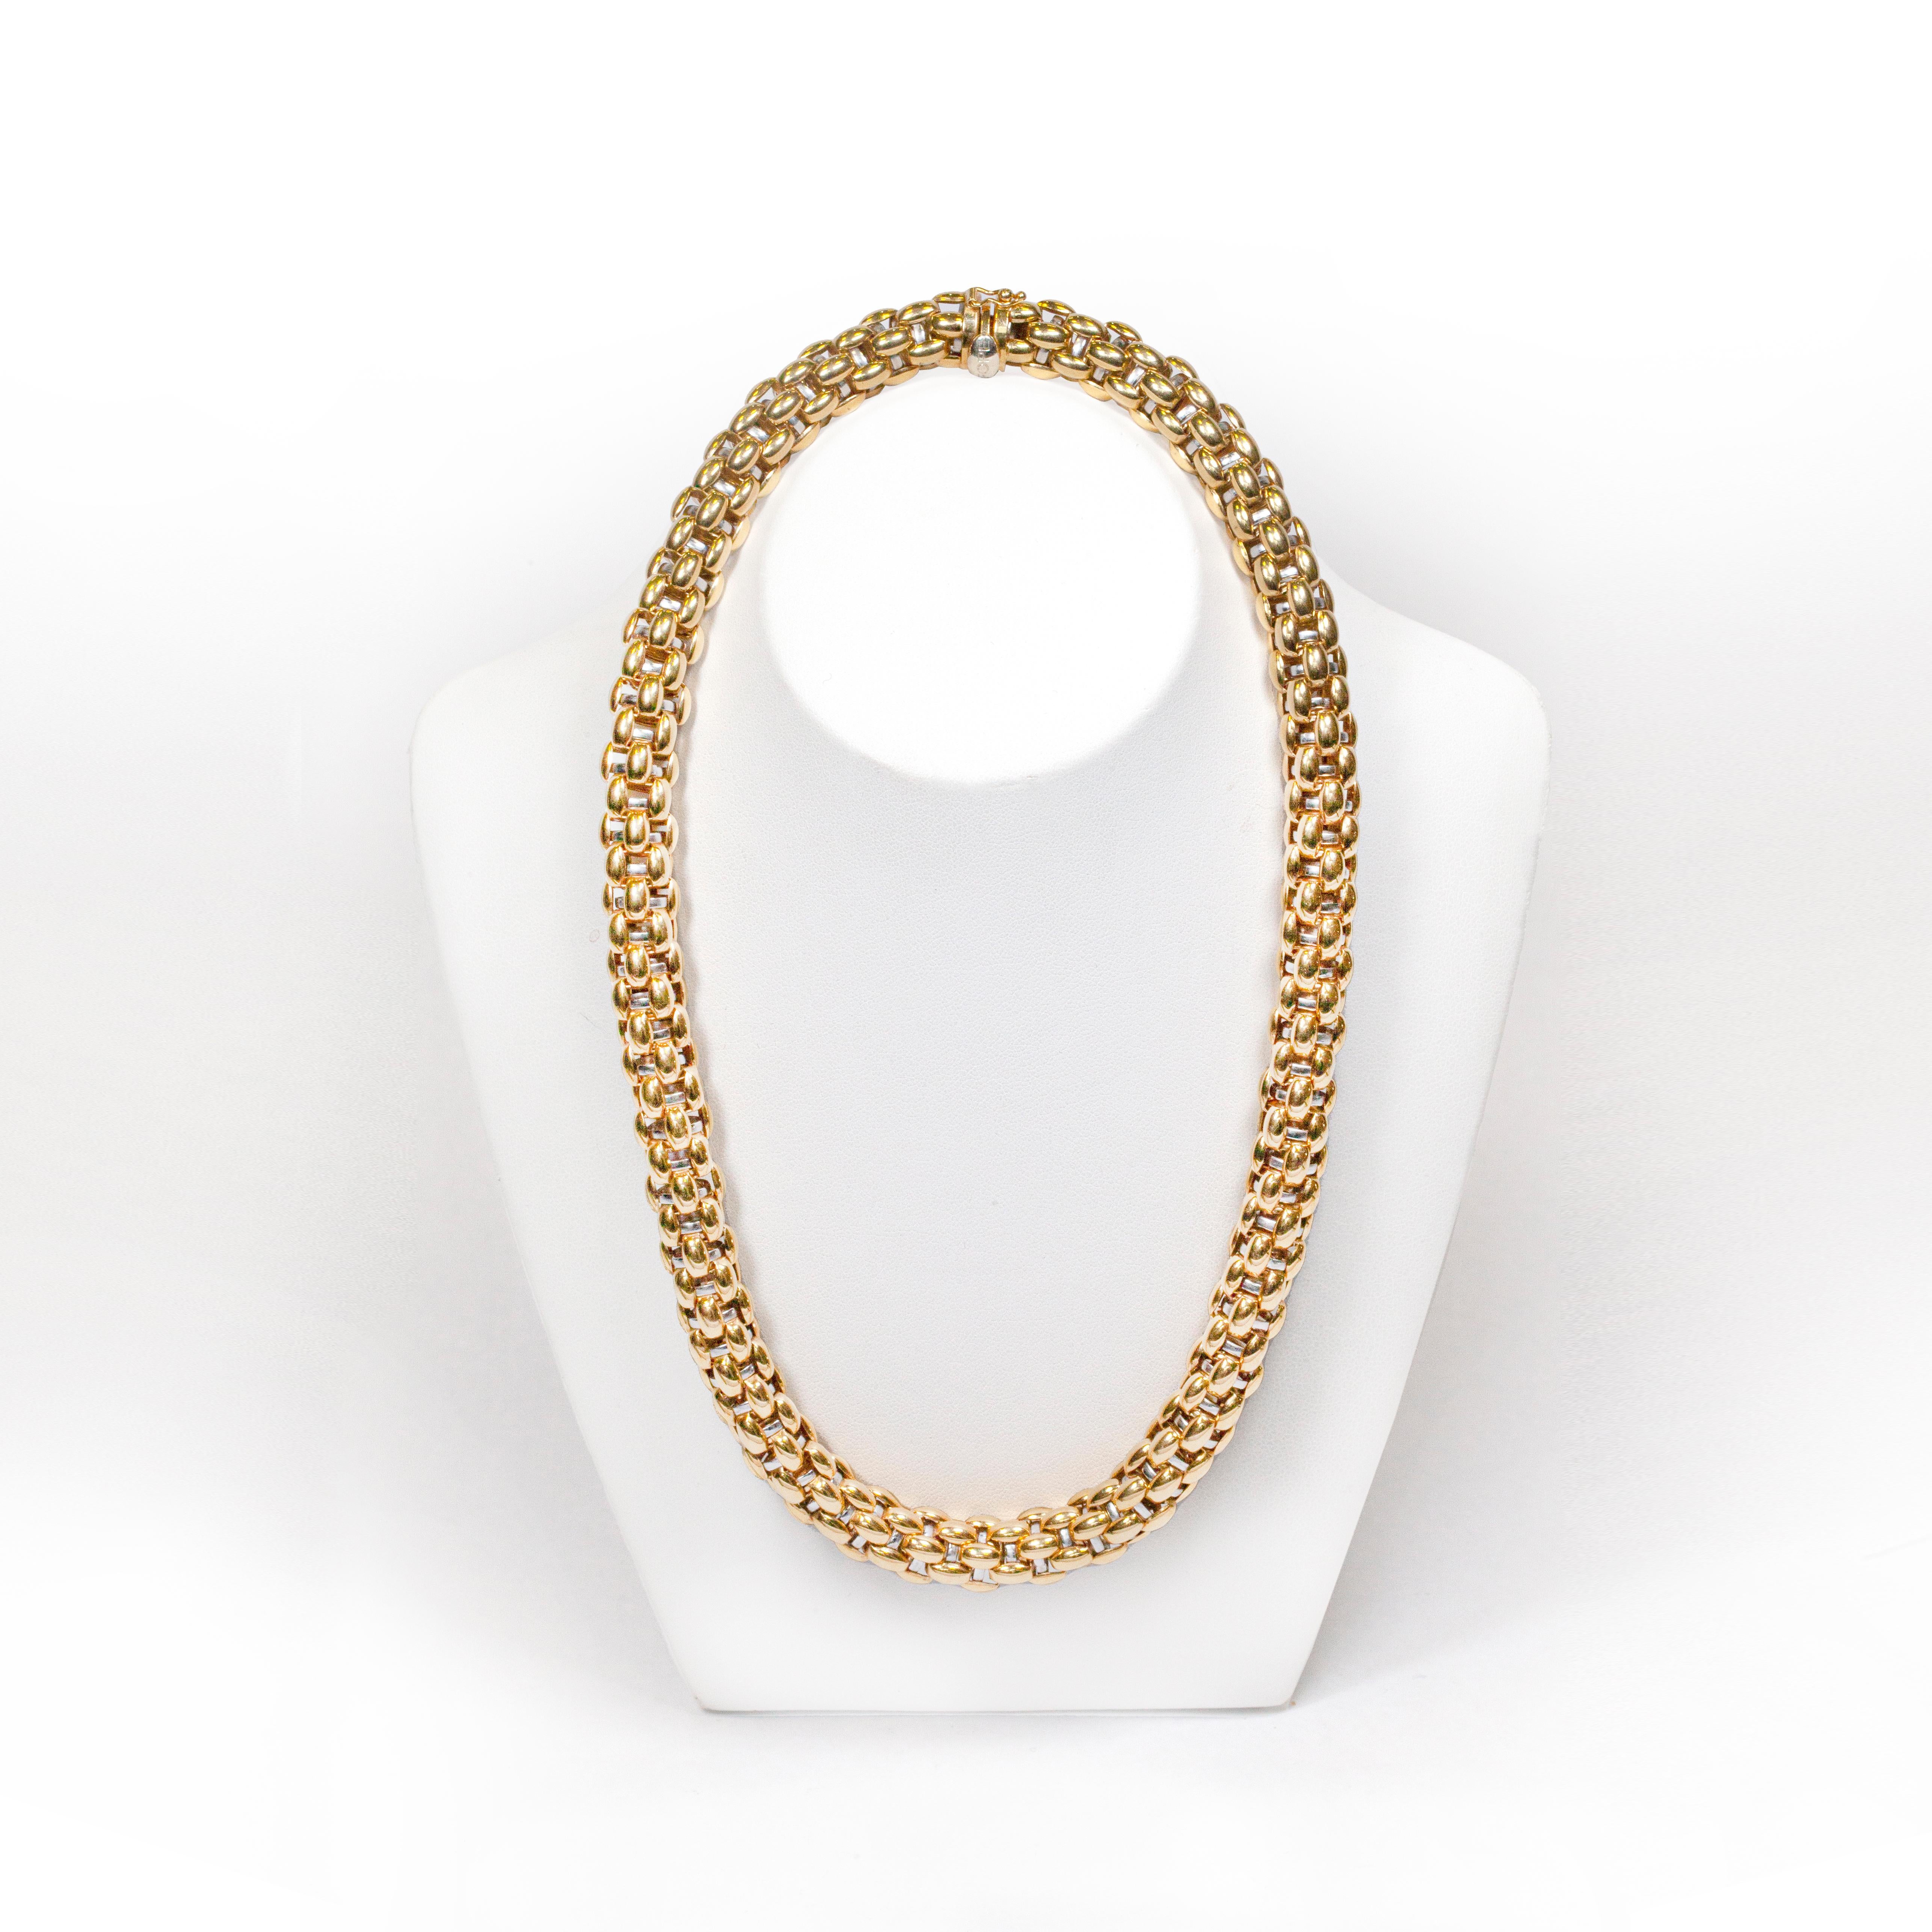 This striking yellow gold necklace from Fope feature's their signature Novecento mesh design with white gold woven into the piece. This incredible necklace elevates everyday outfits, and adds chic glamour on those special occasions.  Totalling 75.80